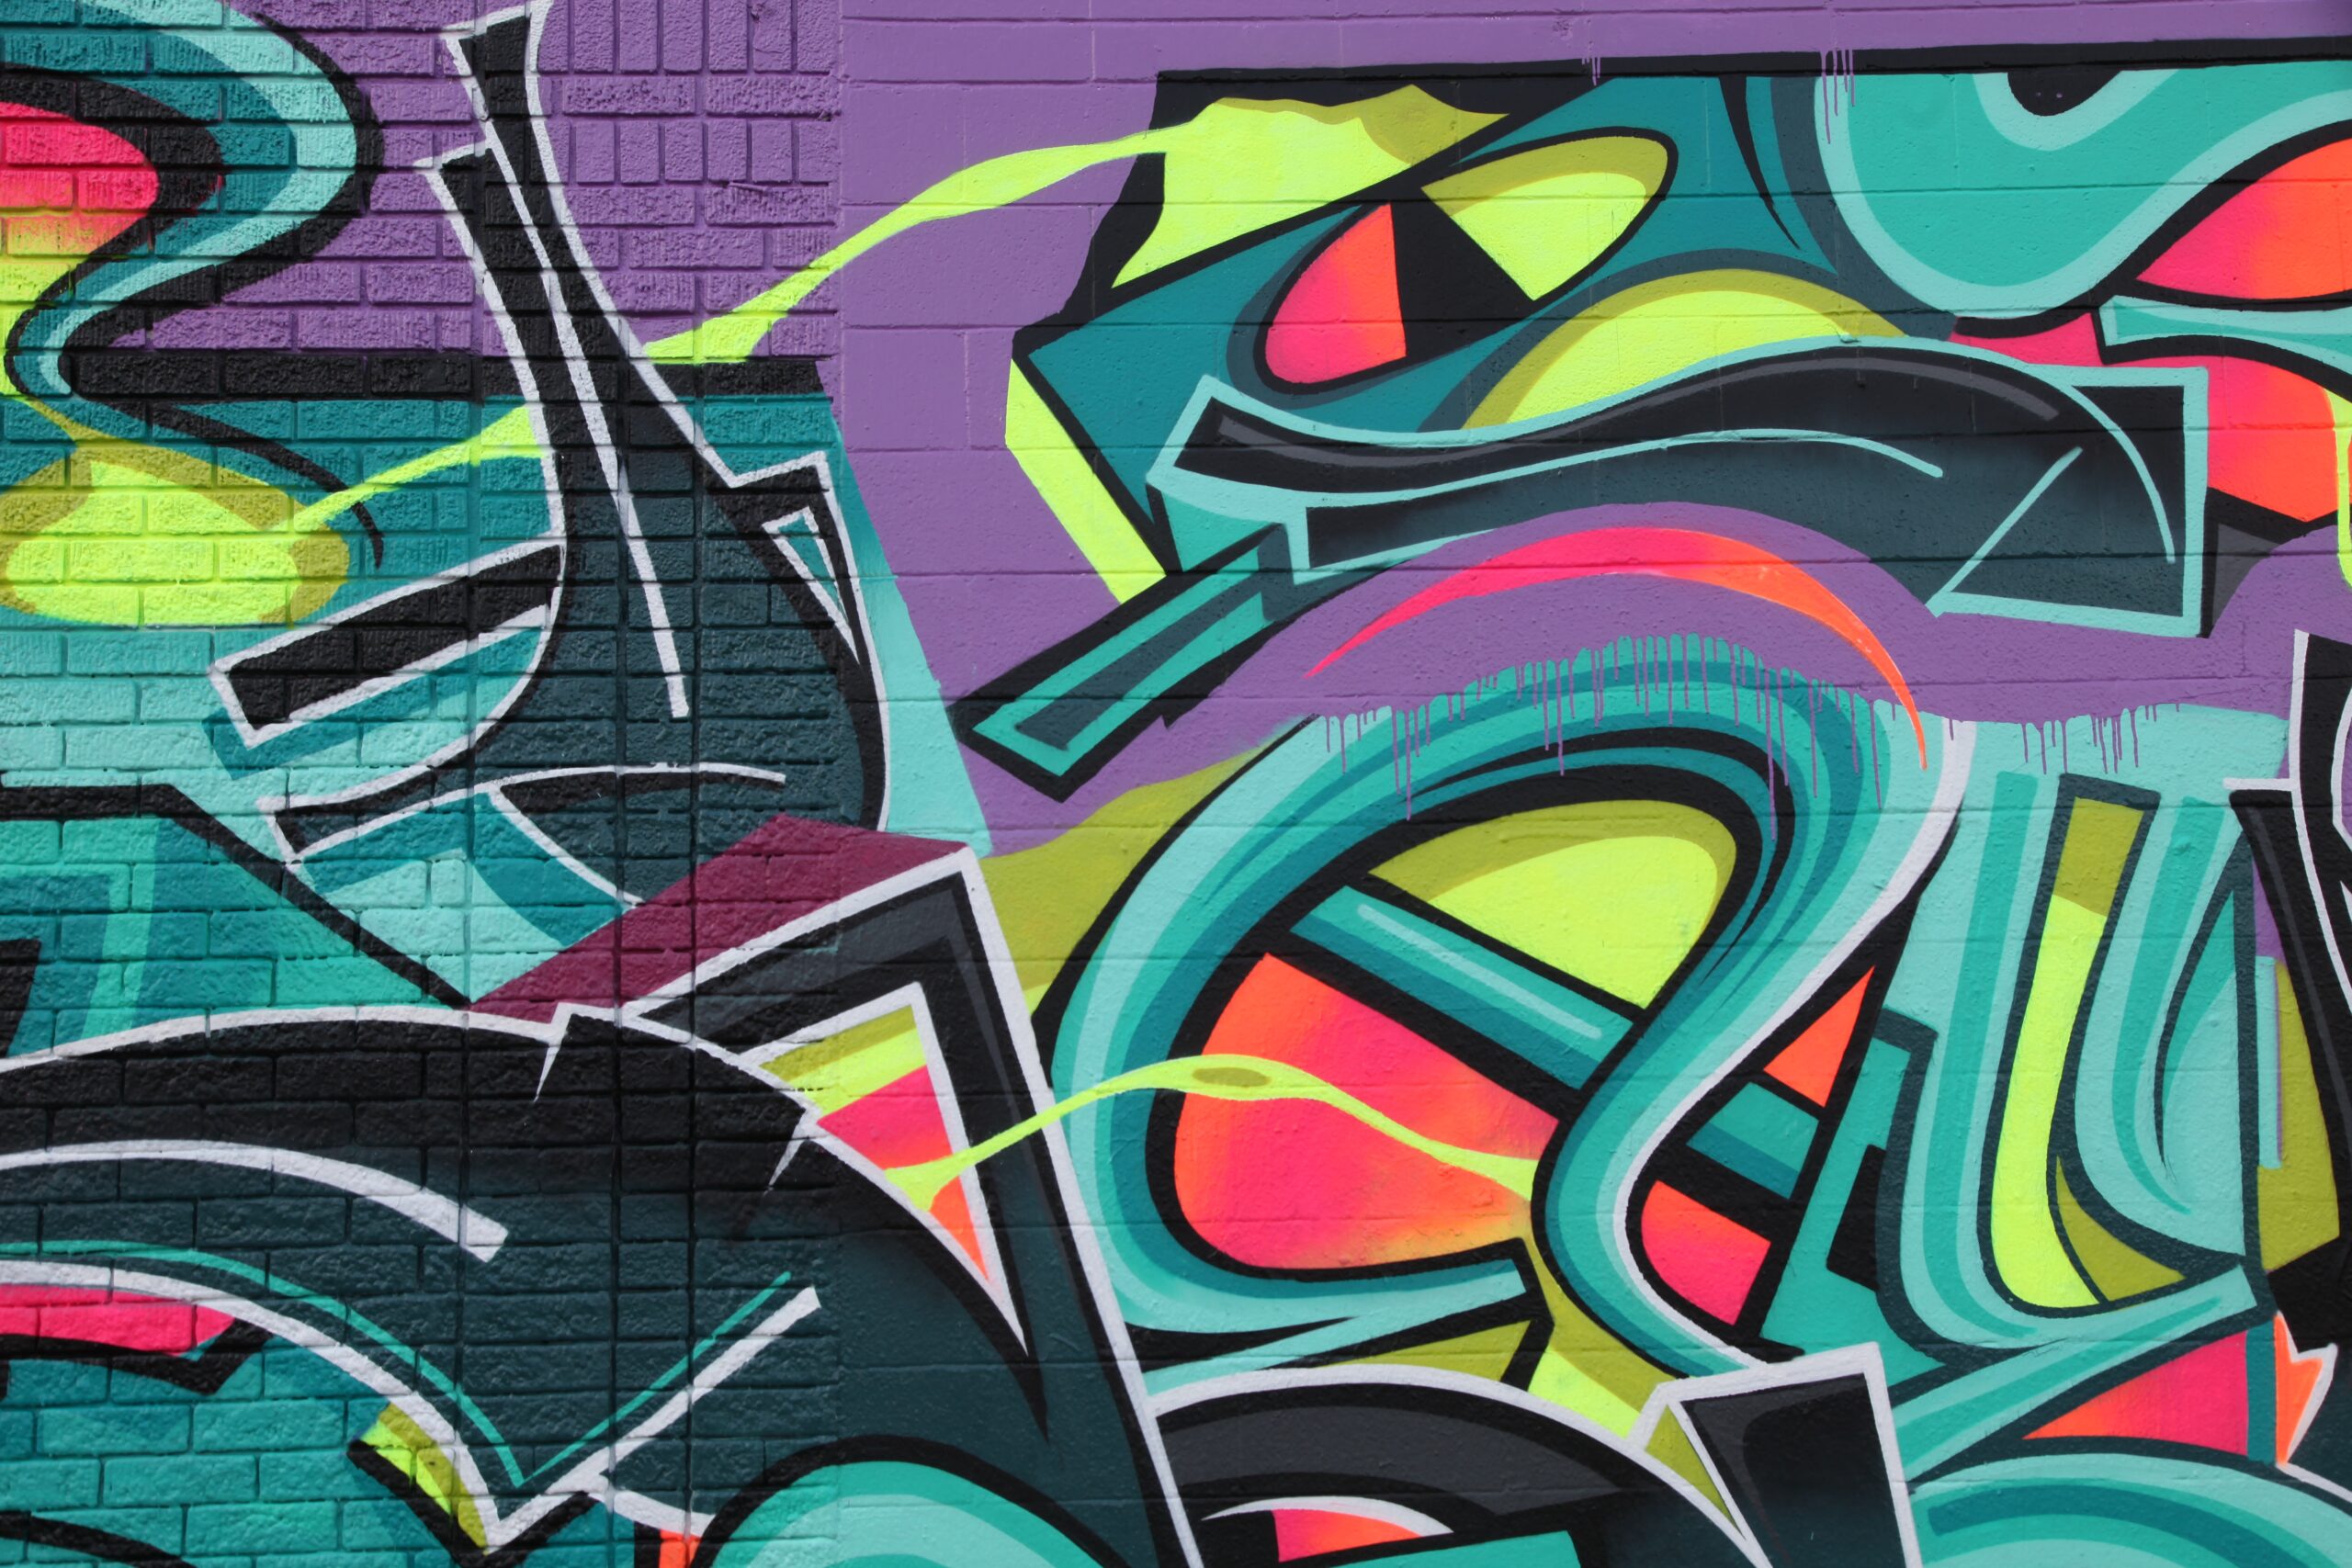 background image of a graffiti-covered wall